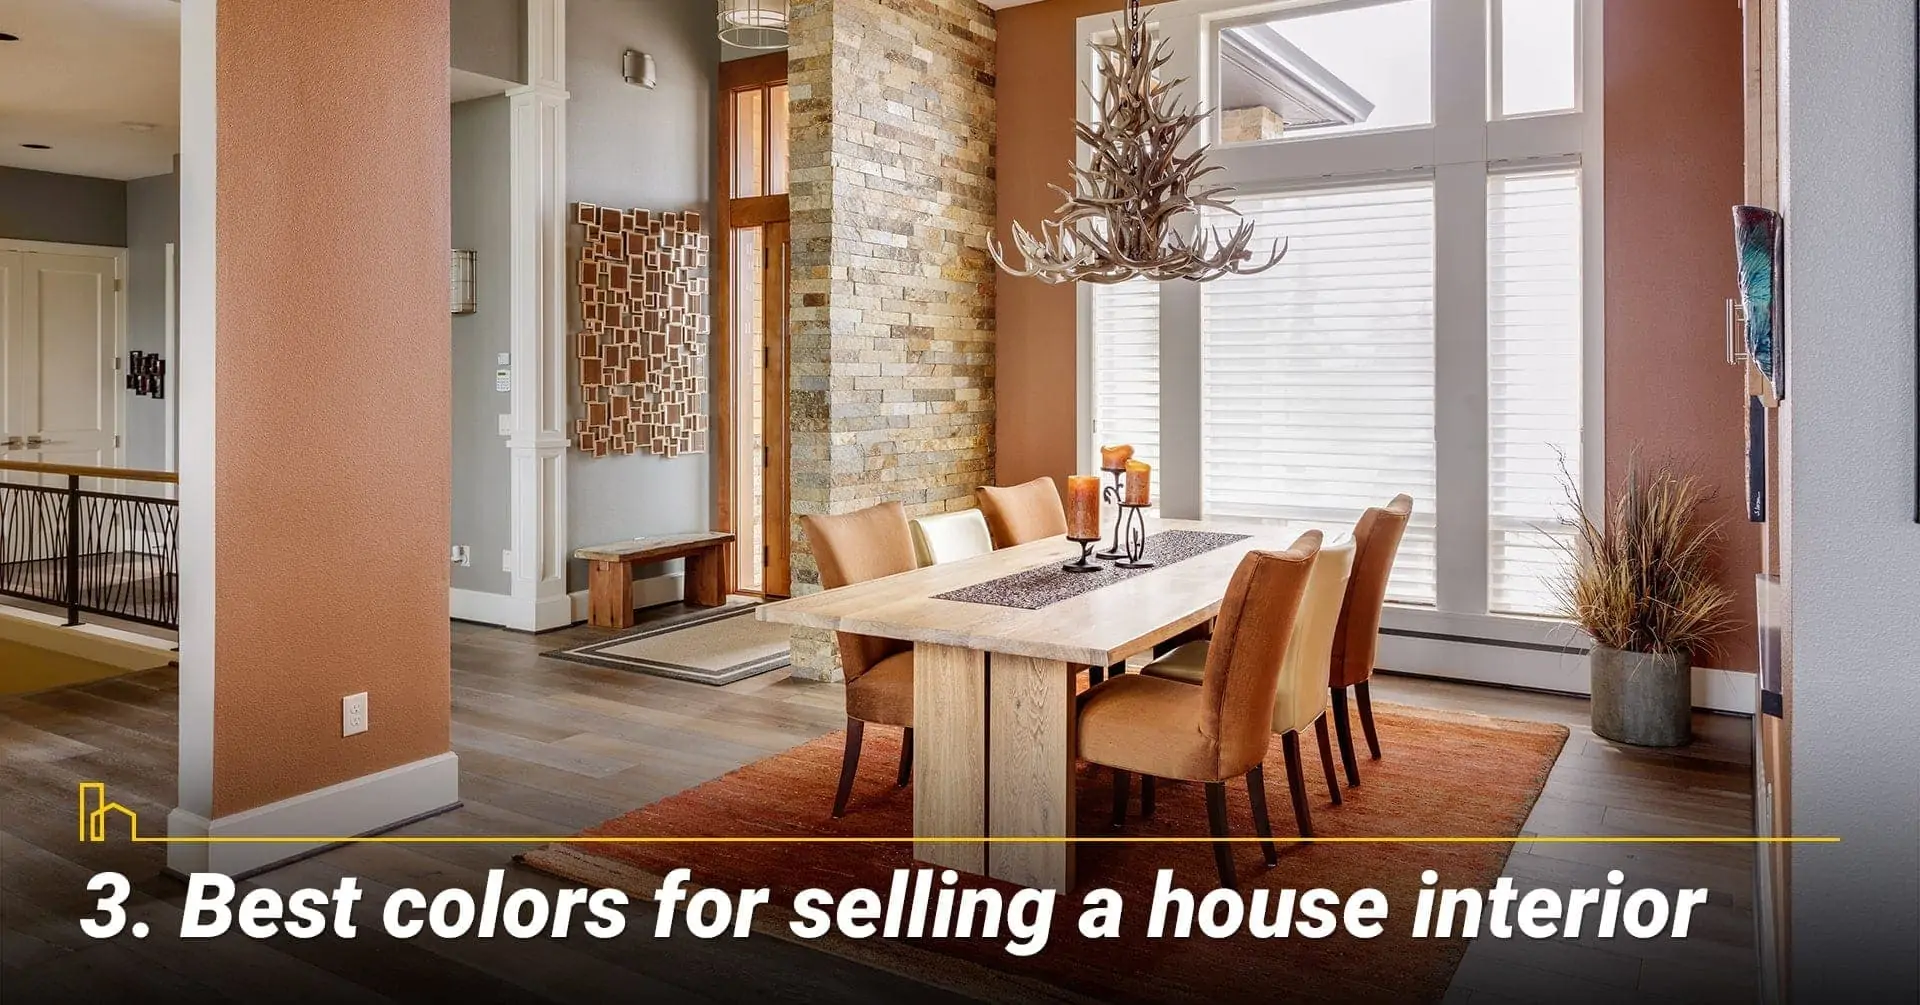 Best colors for selling a house interior, best colors for interior of the house